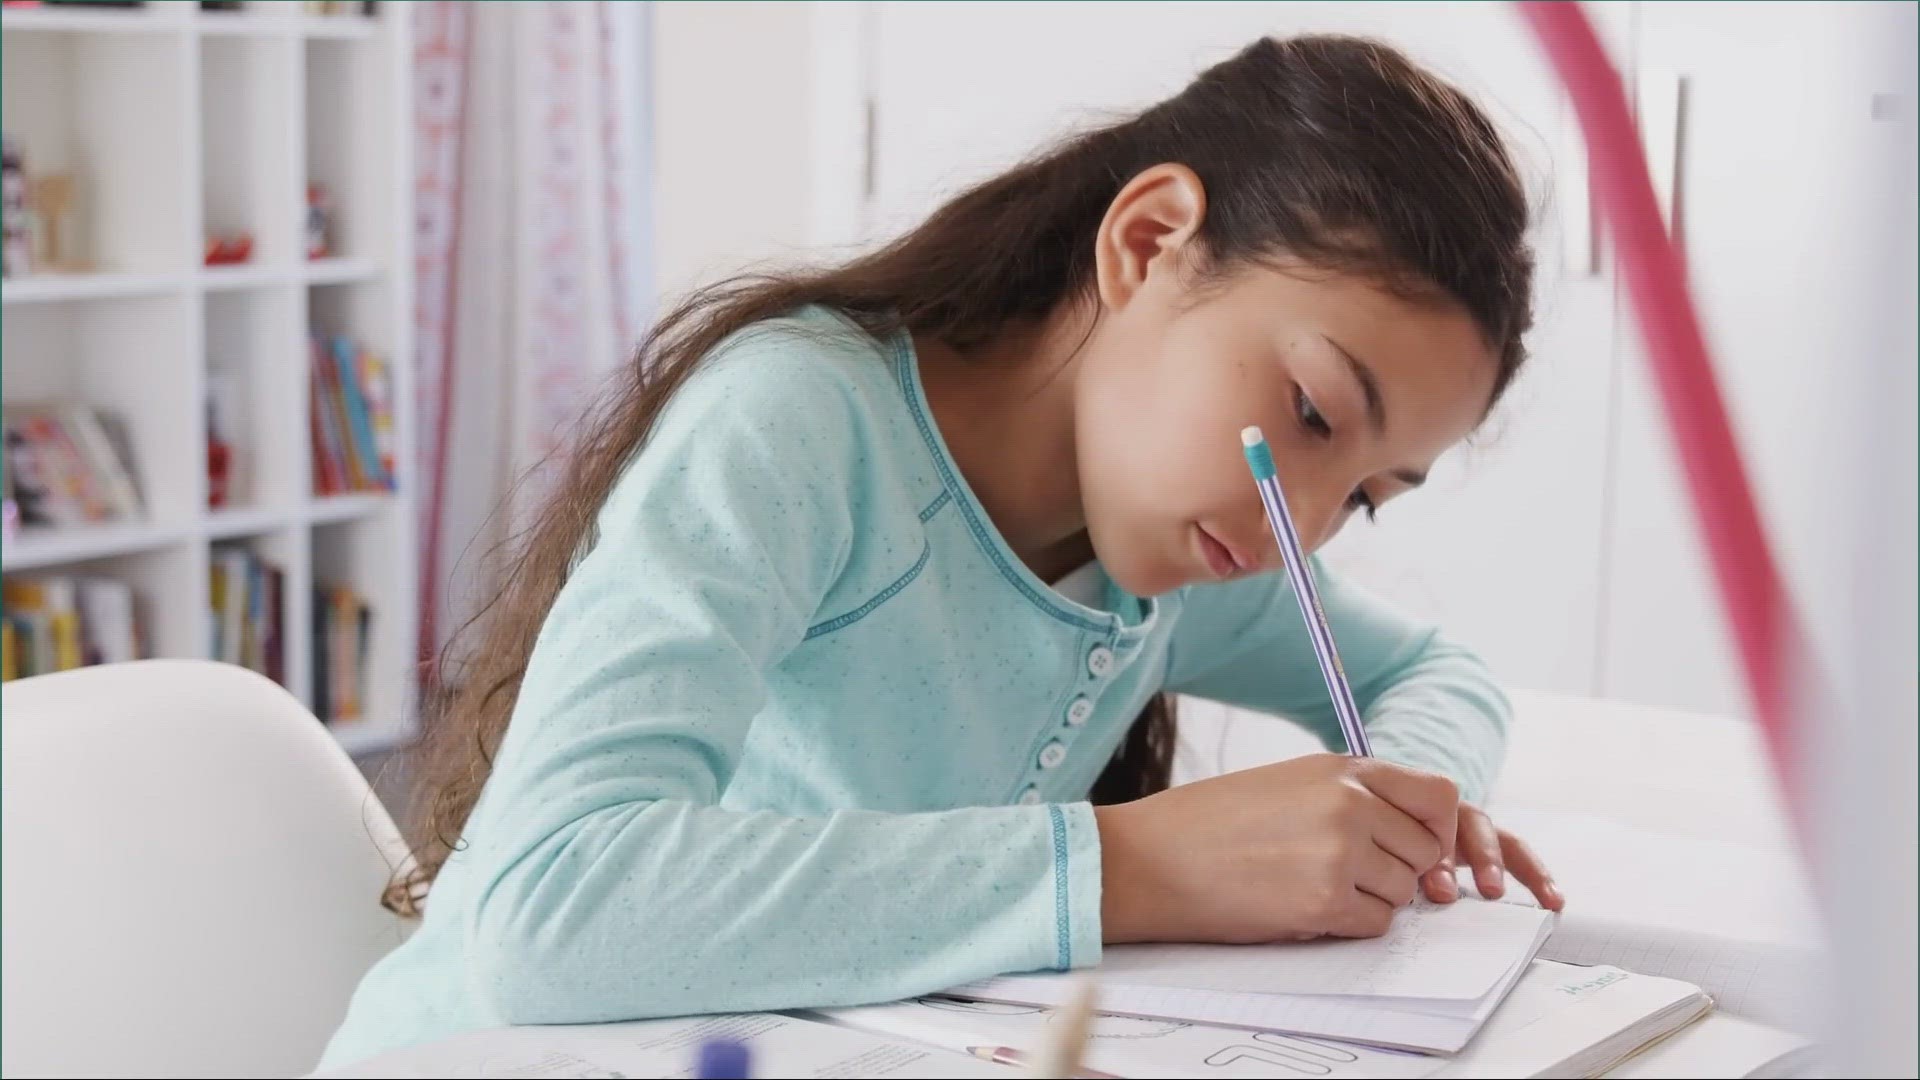 An expert shares ways on how to help your kids overcome homework struggles.